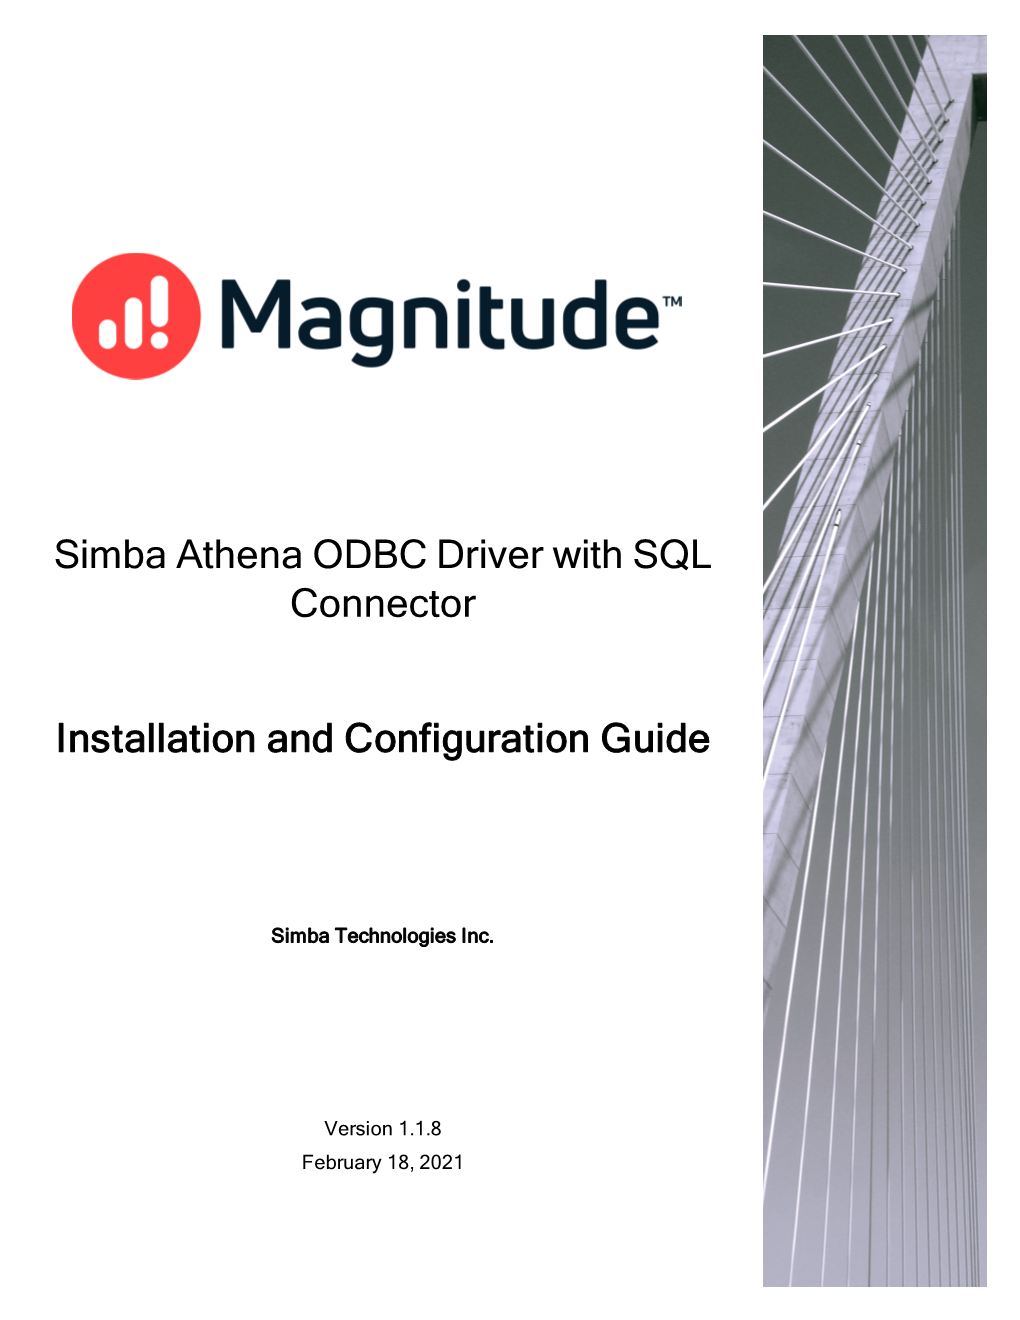 Simba Athena ODBC Driver with SQL Connector Installation and Configuration Guide Explains How to Install and Configure the Simba Athena ODBC Driver with SQL Connector